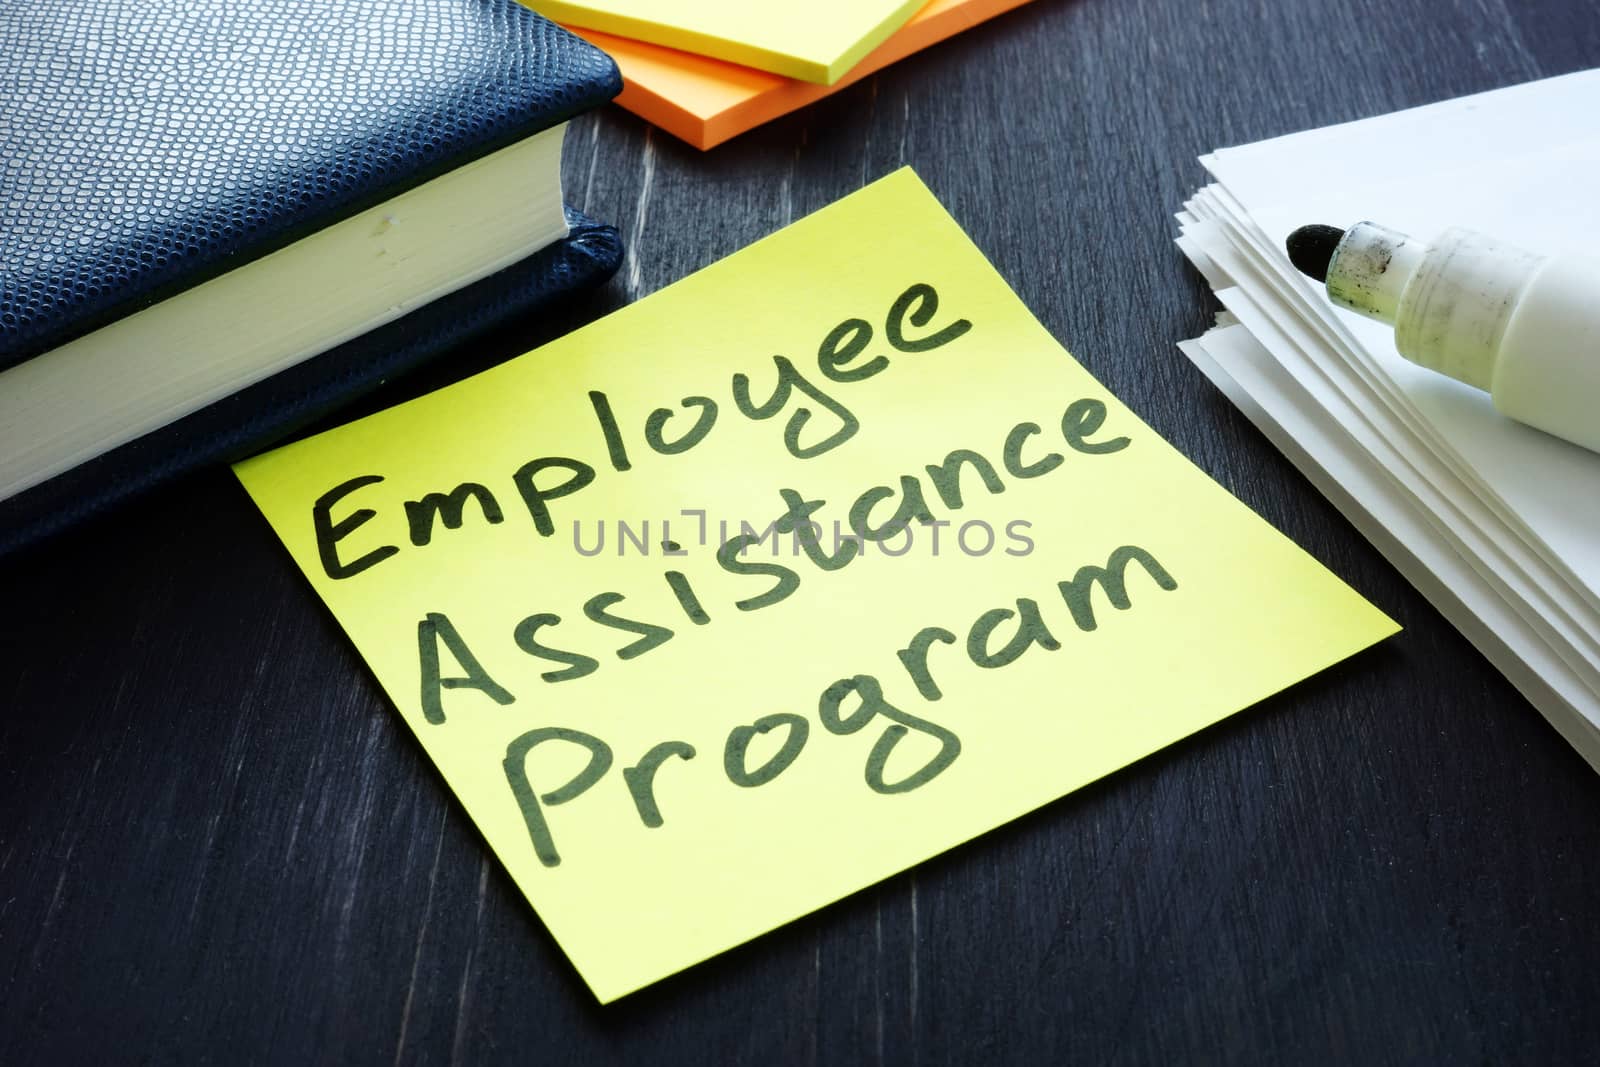 Employee assistance program EAP sign and pile of papers. by designer491